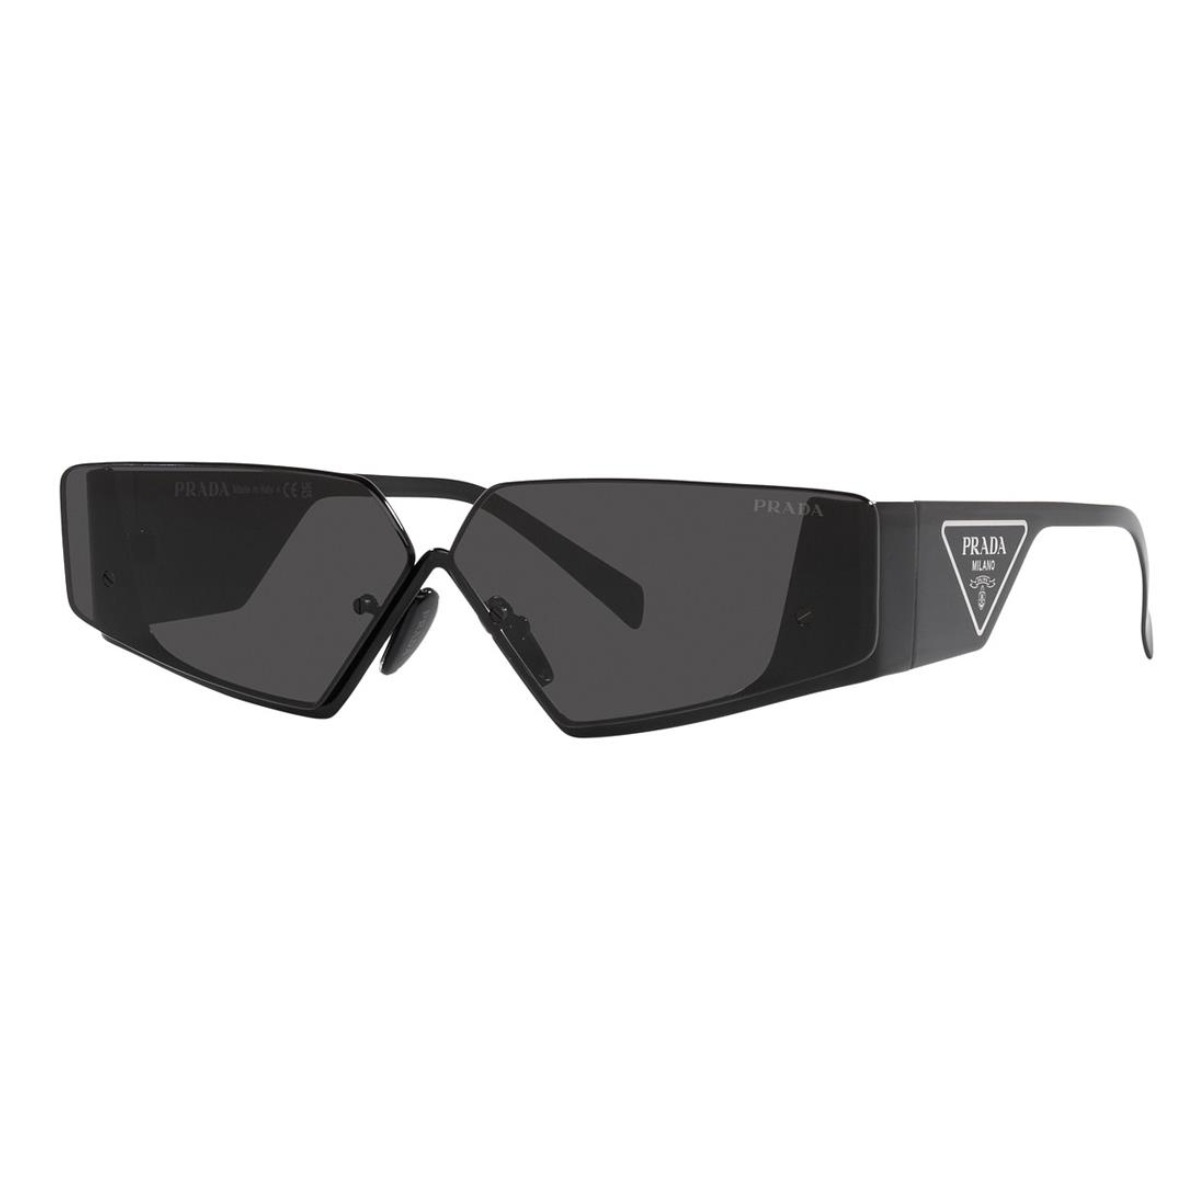 "Elevate your look with Prada SPR 58Z 1AB-06L sunglasses from Optorium. These chic metal rectangle shades in classic black with non-polarized grey lenses are perfect for men and women's fashion statements."